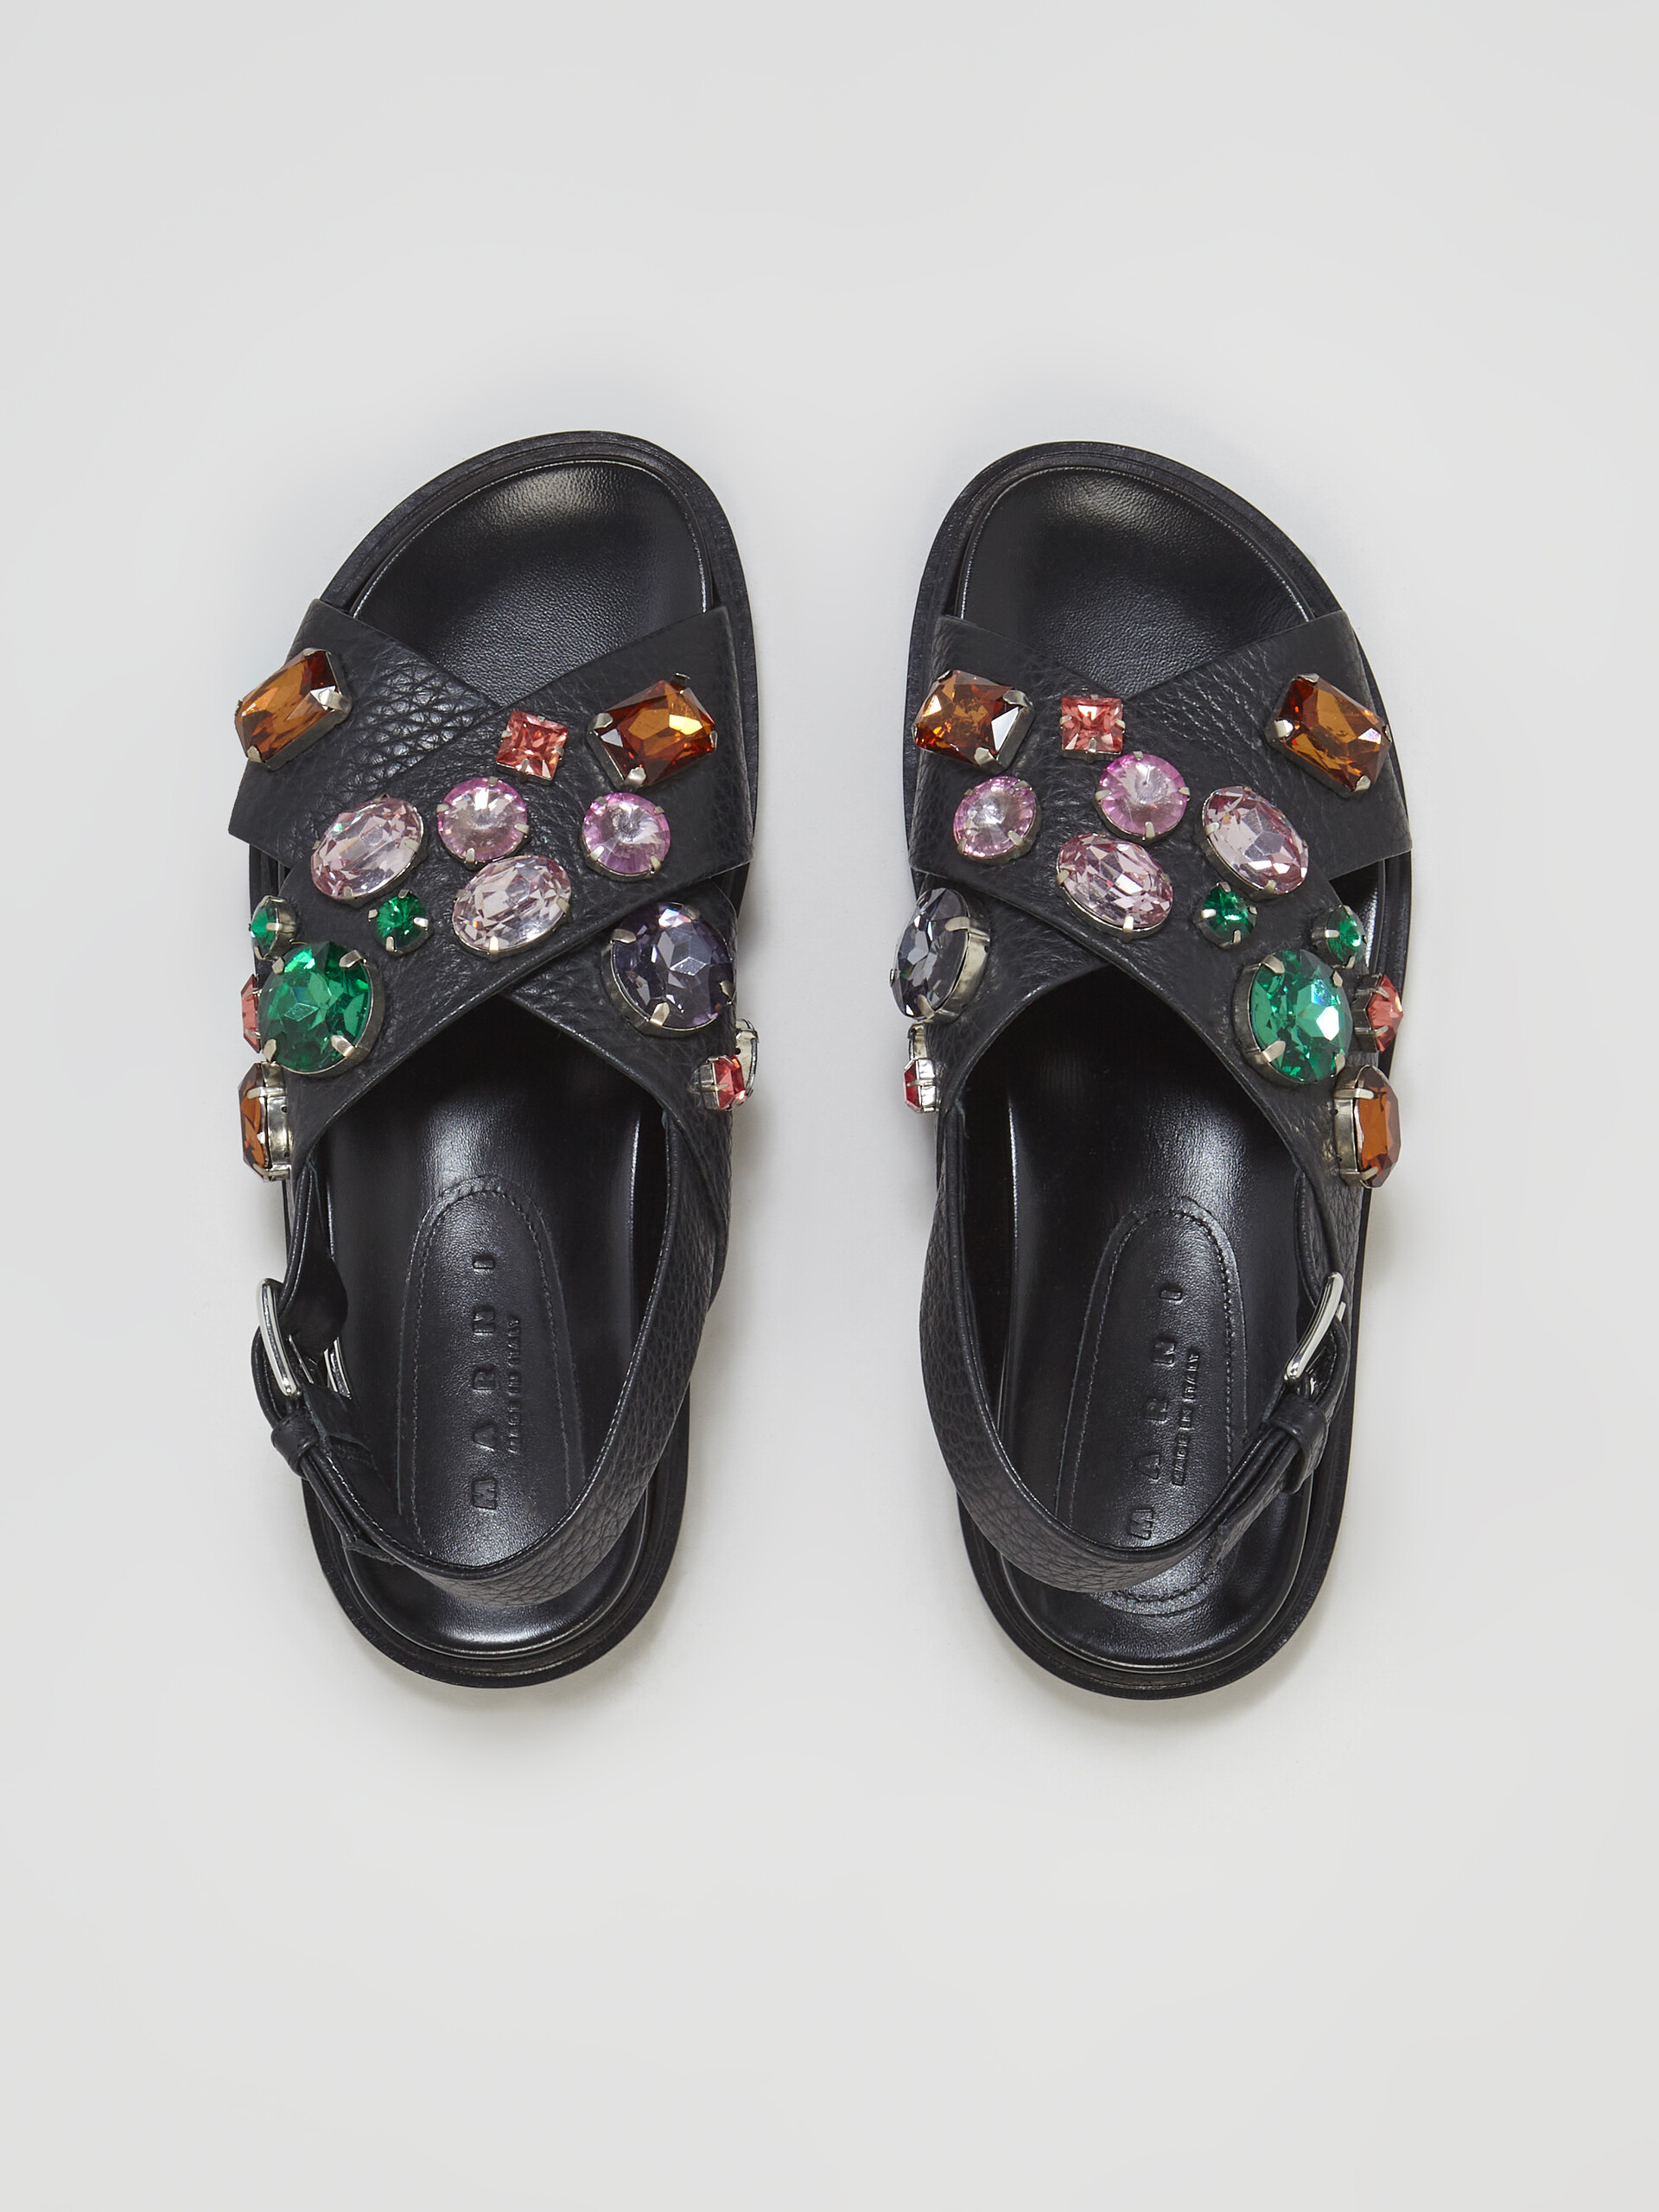 Black leather Fussbett with glass beads - Sandals - Image 4